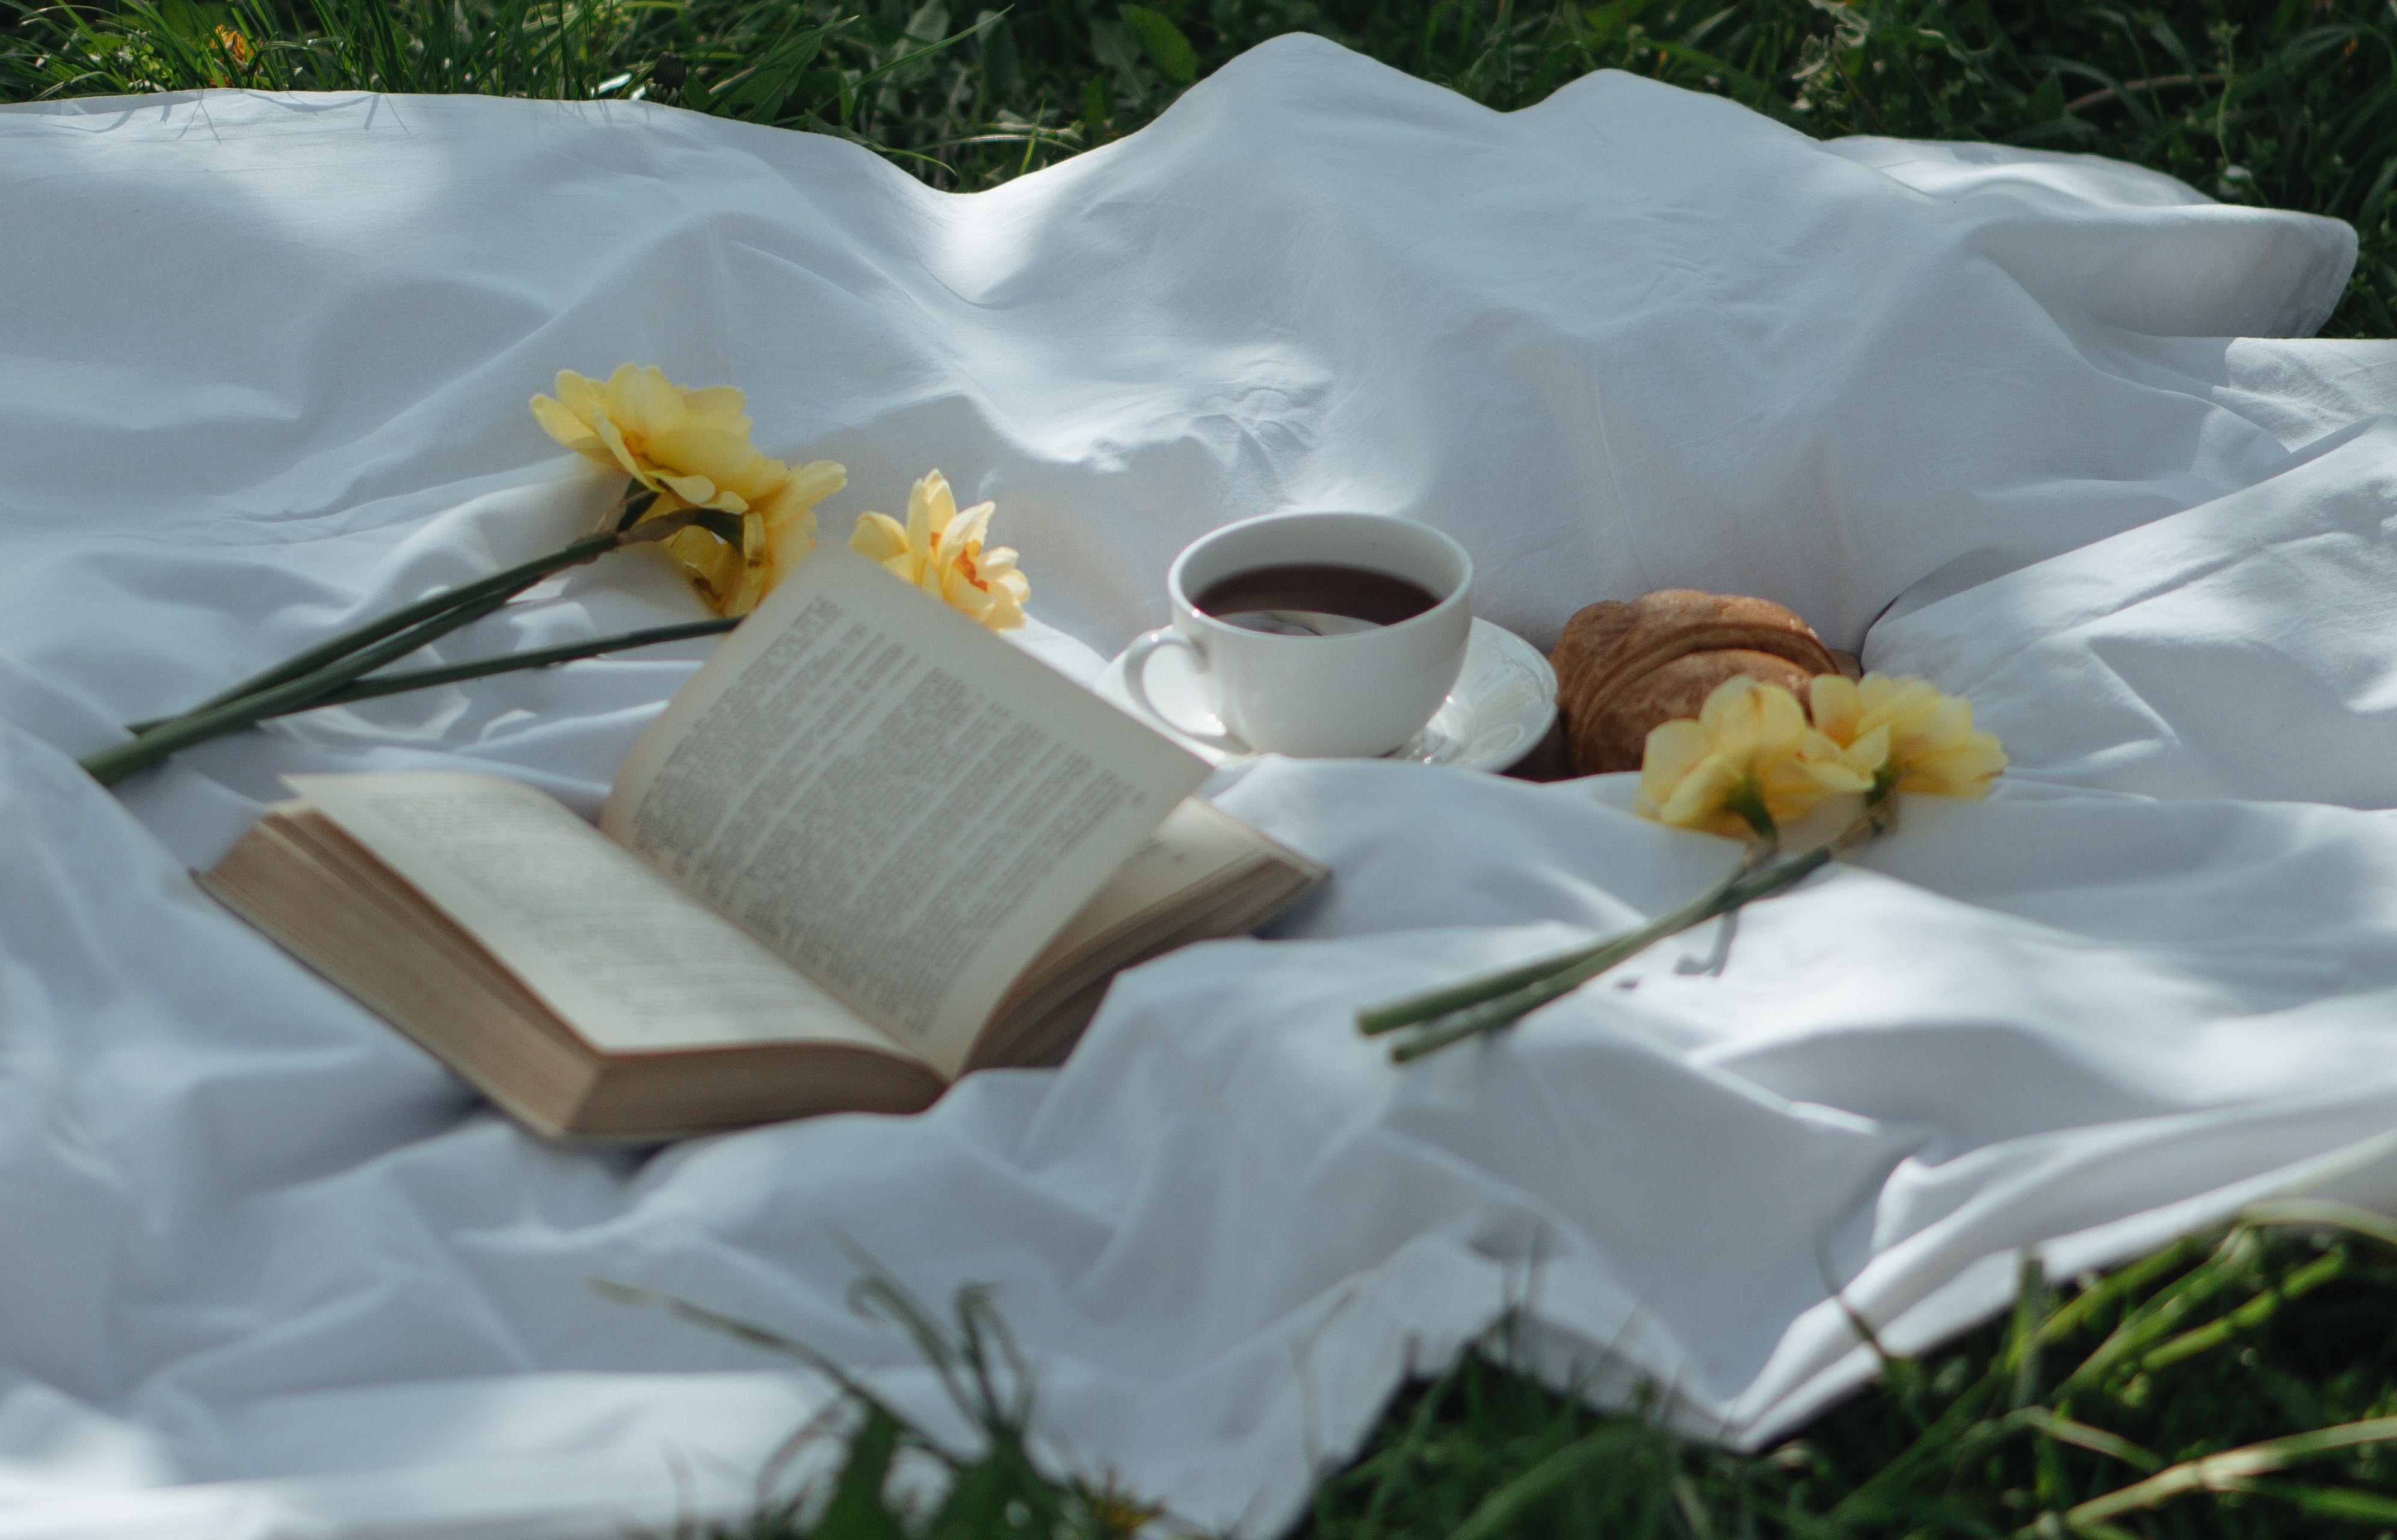 Open book on a white blanket on the grass, with coffee and a pastry